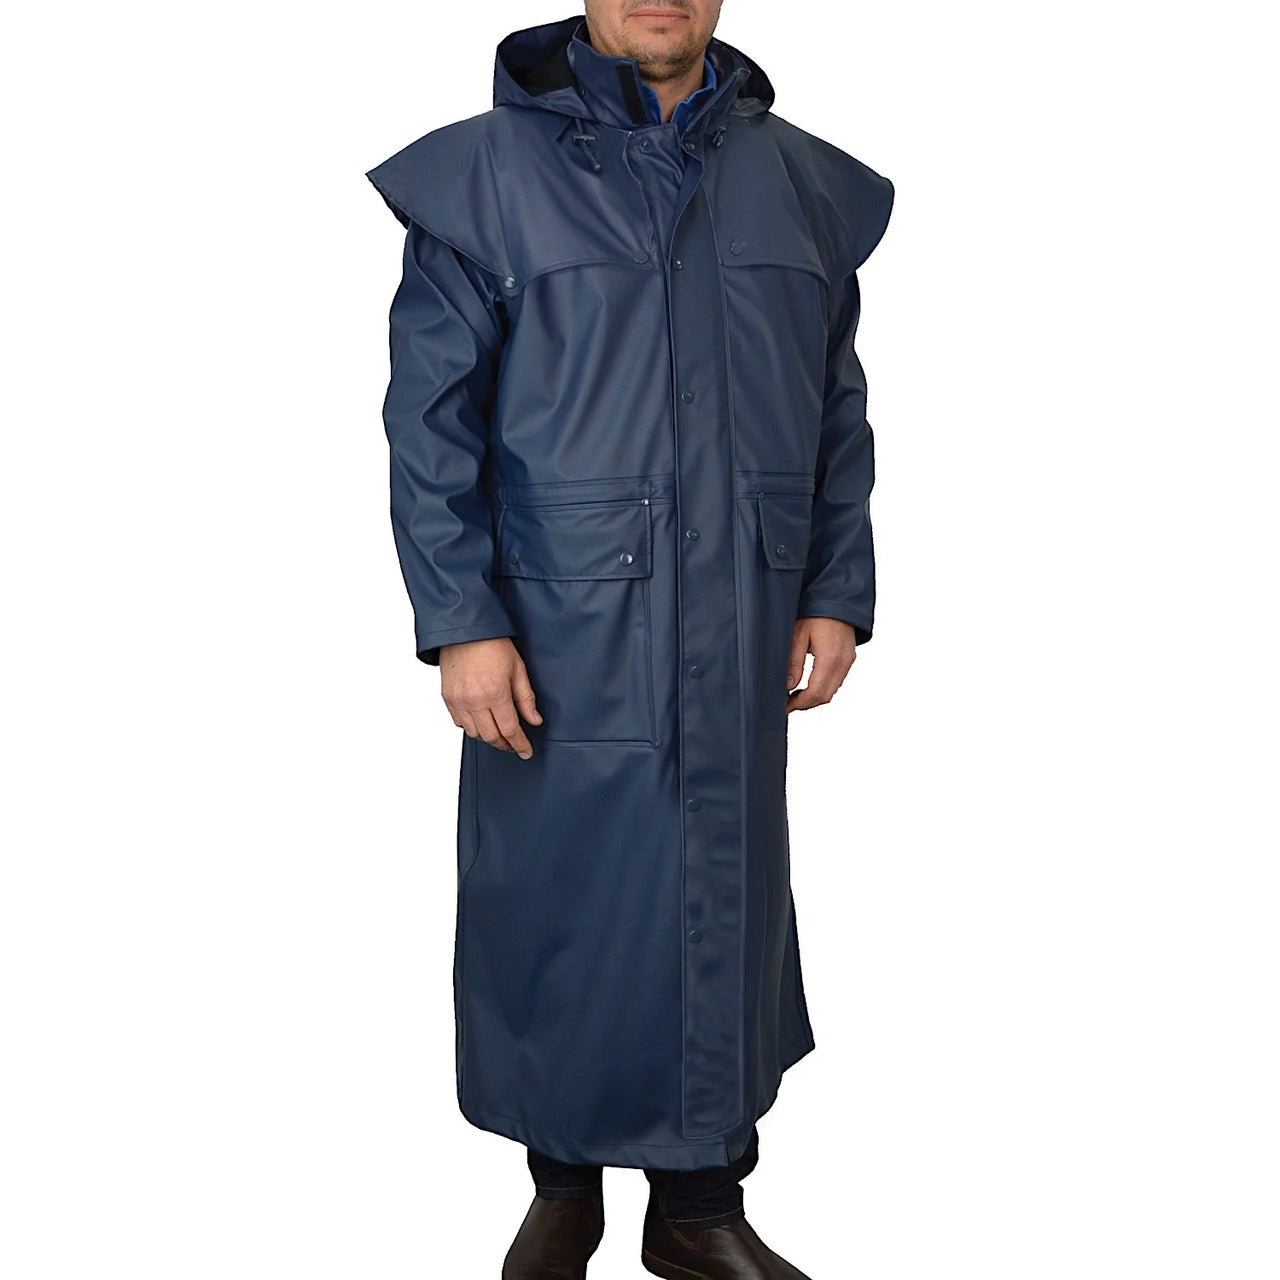 Thomas Cook Pioneer Long Raincoat - The Trading Stables